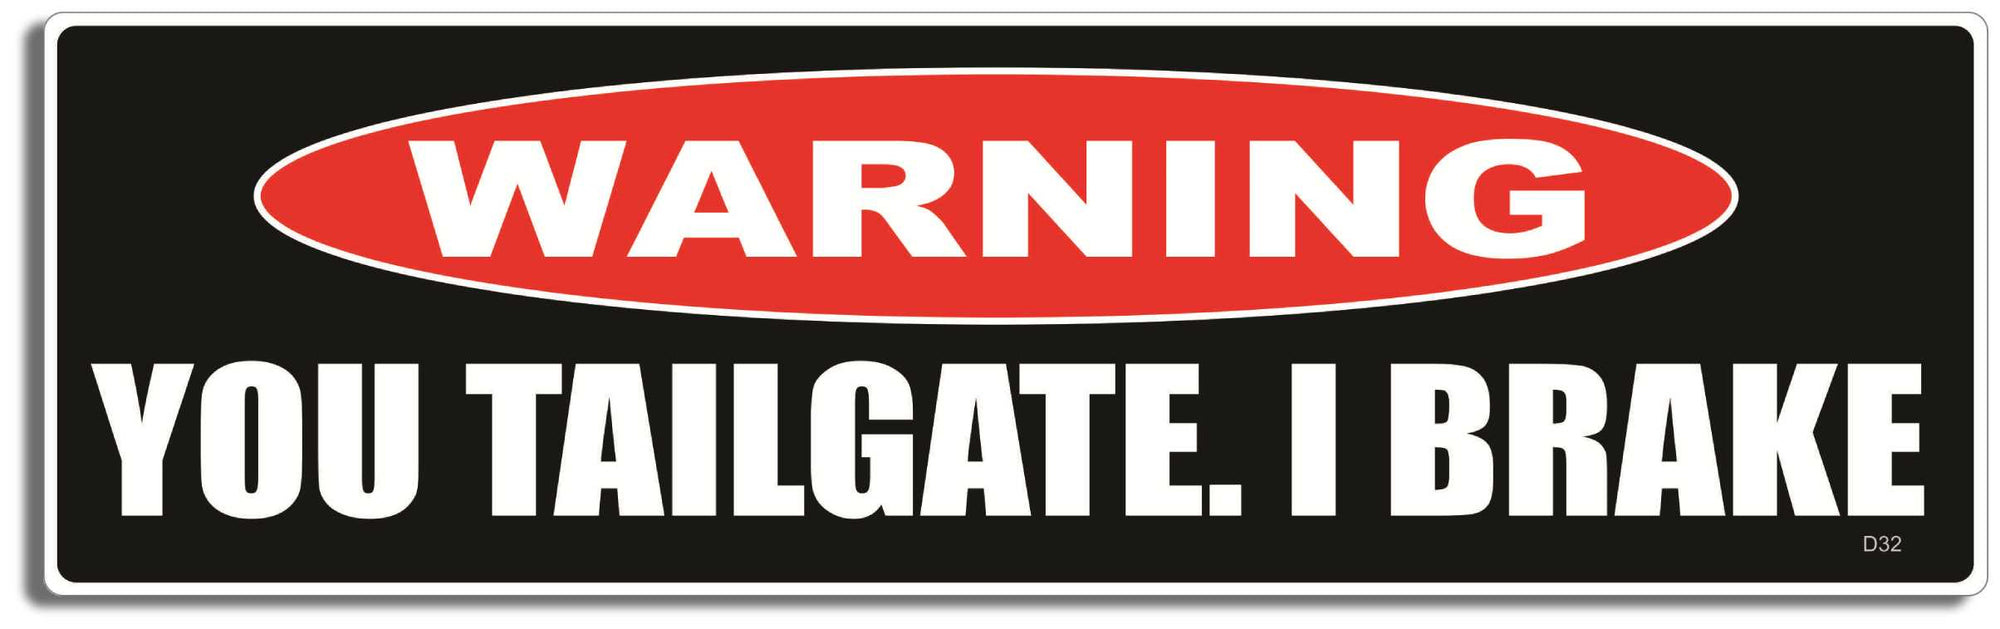 Warning: You tailgate. I brake - 3" x 10" Bumper Sticker--Car Magnet- -  Decal Car Car Magnet-funny Bumper Sticker Car Magnet Warning: You tailgate. I brake-  Decal for carsdrive safely, Driving, Funny, safe driving, tailgaters, tailgating